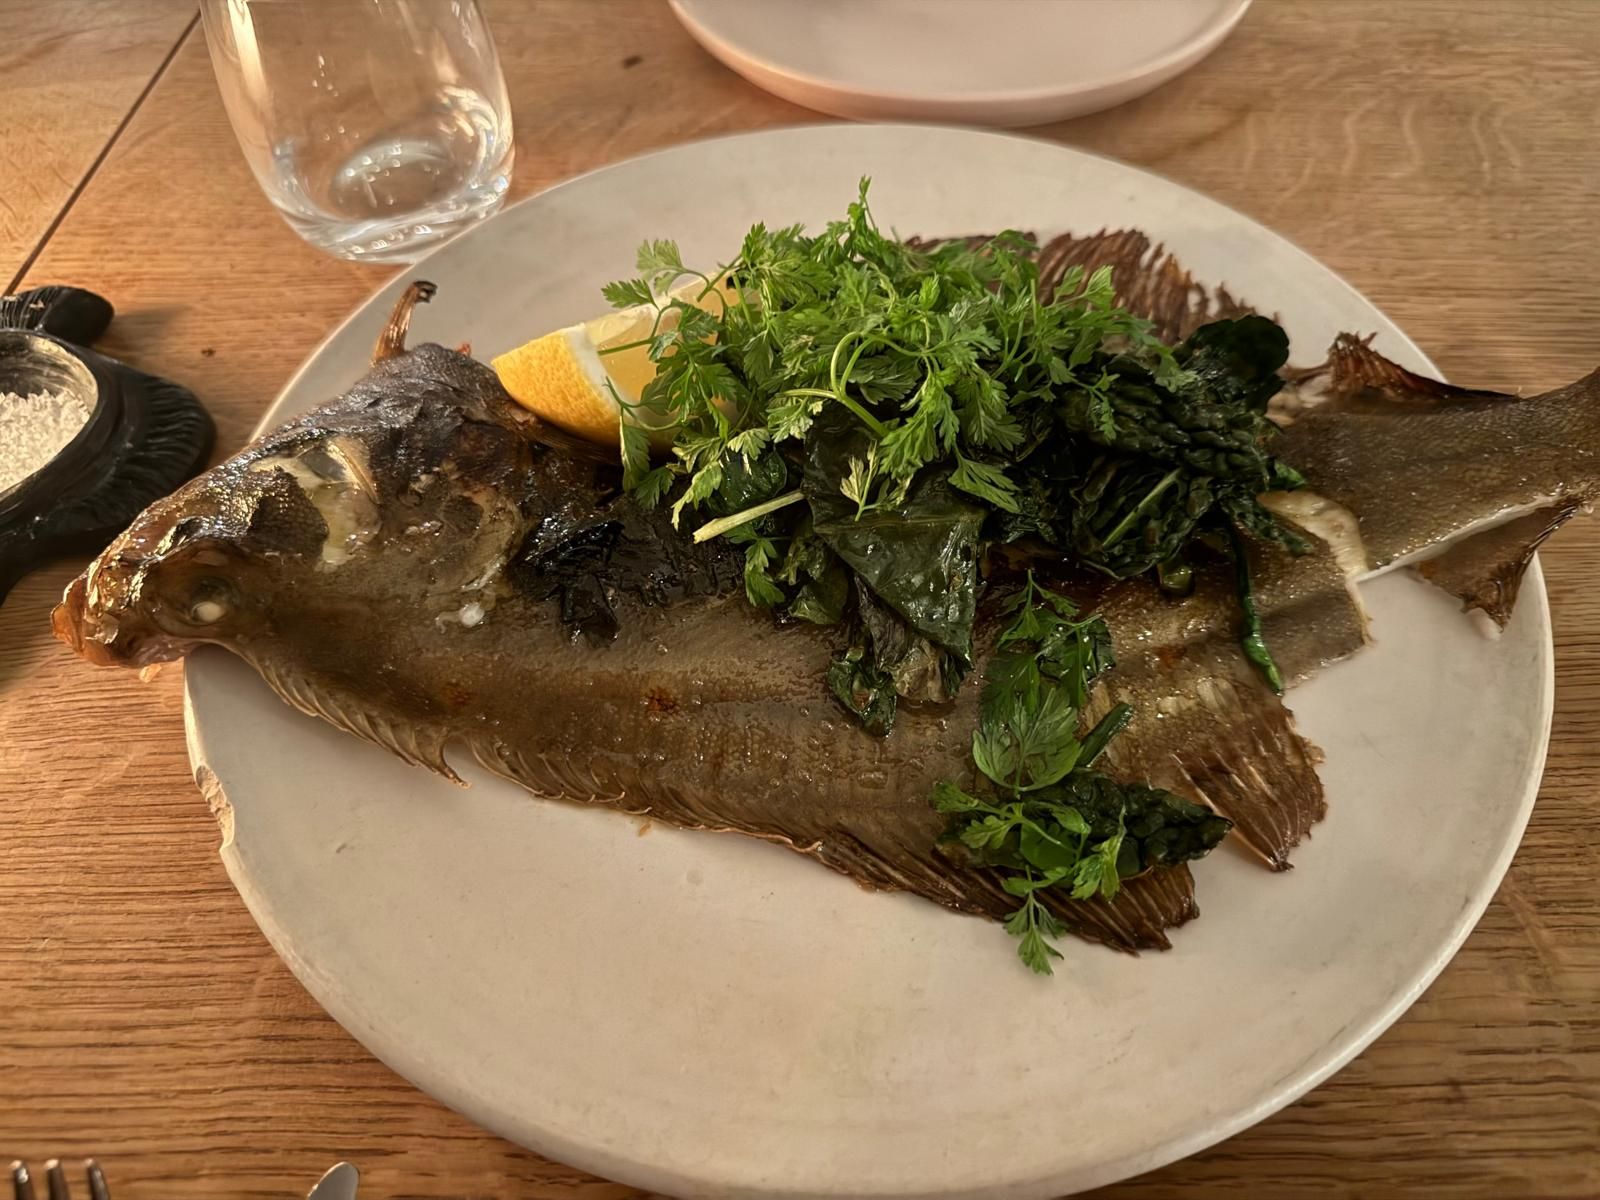 Whole plaice in nori butter and kale